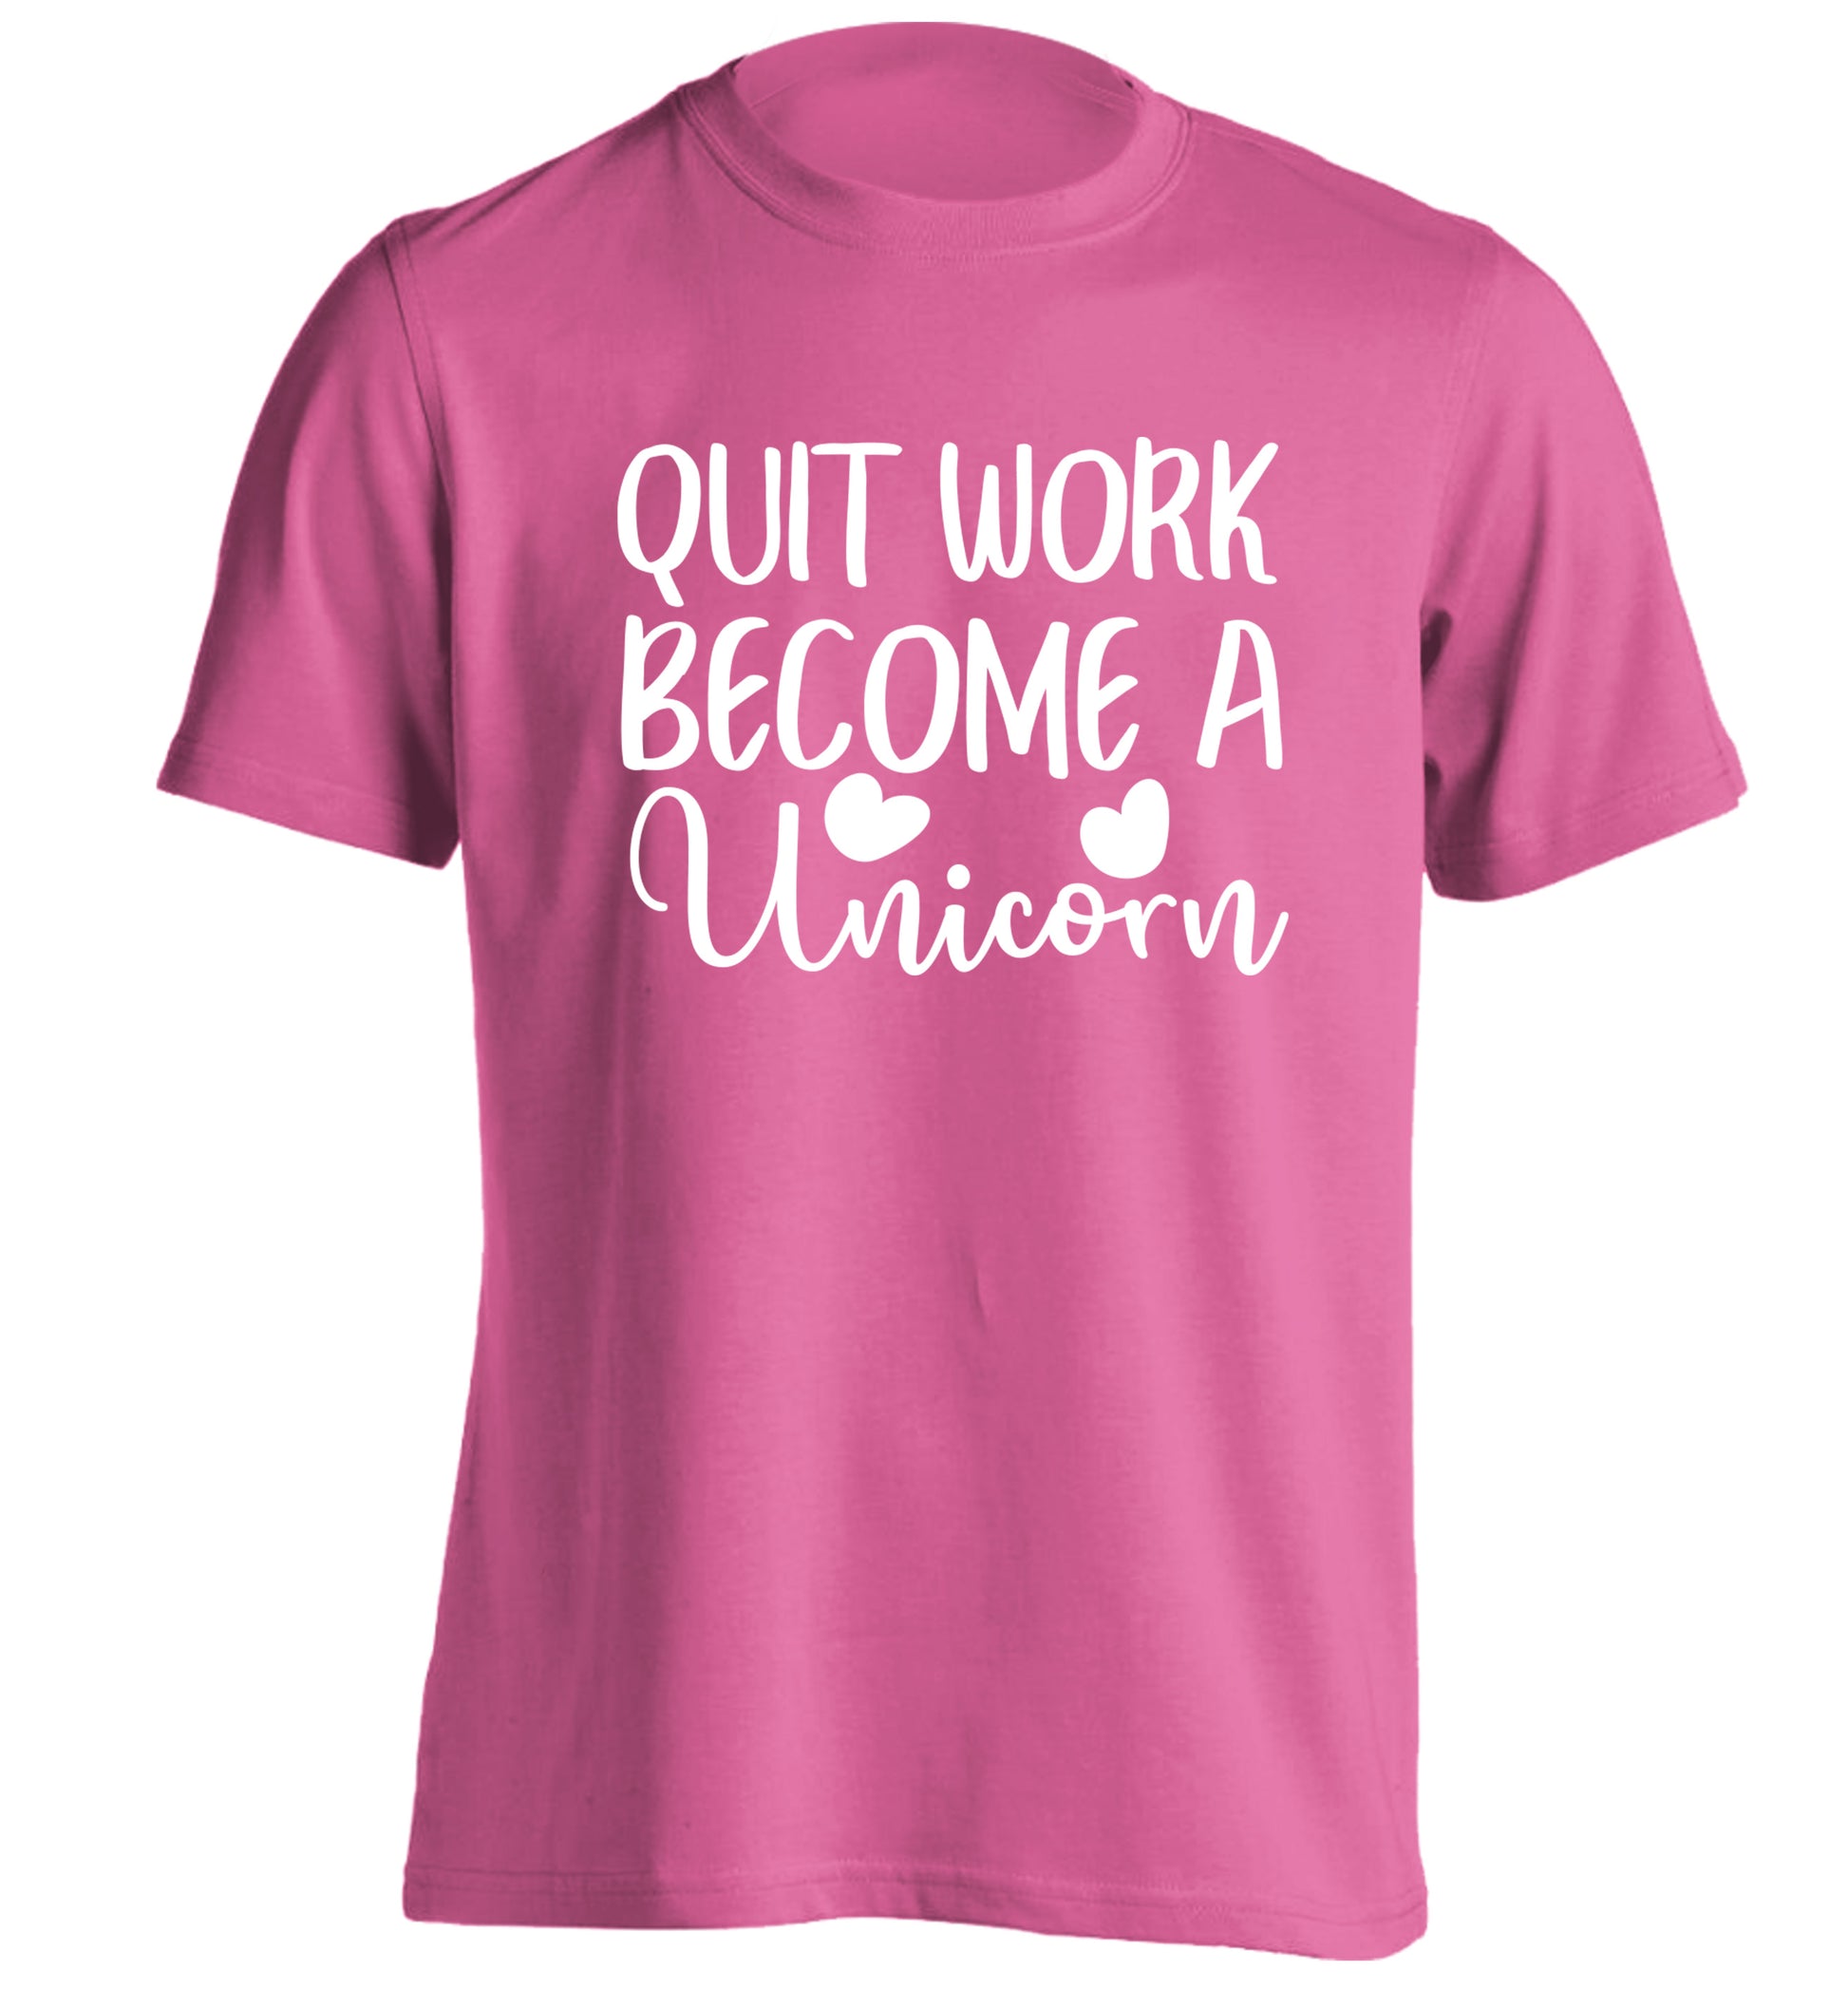 Quit work become a unicorn adults unisex pink Tshirt 2XL